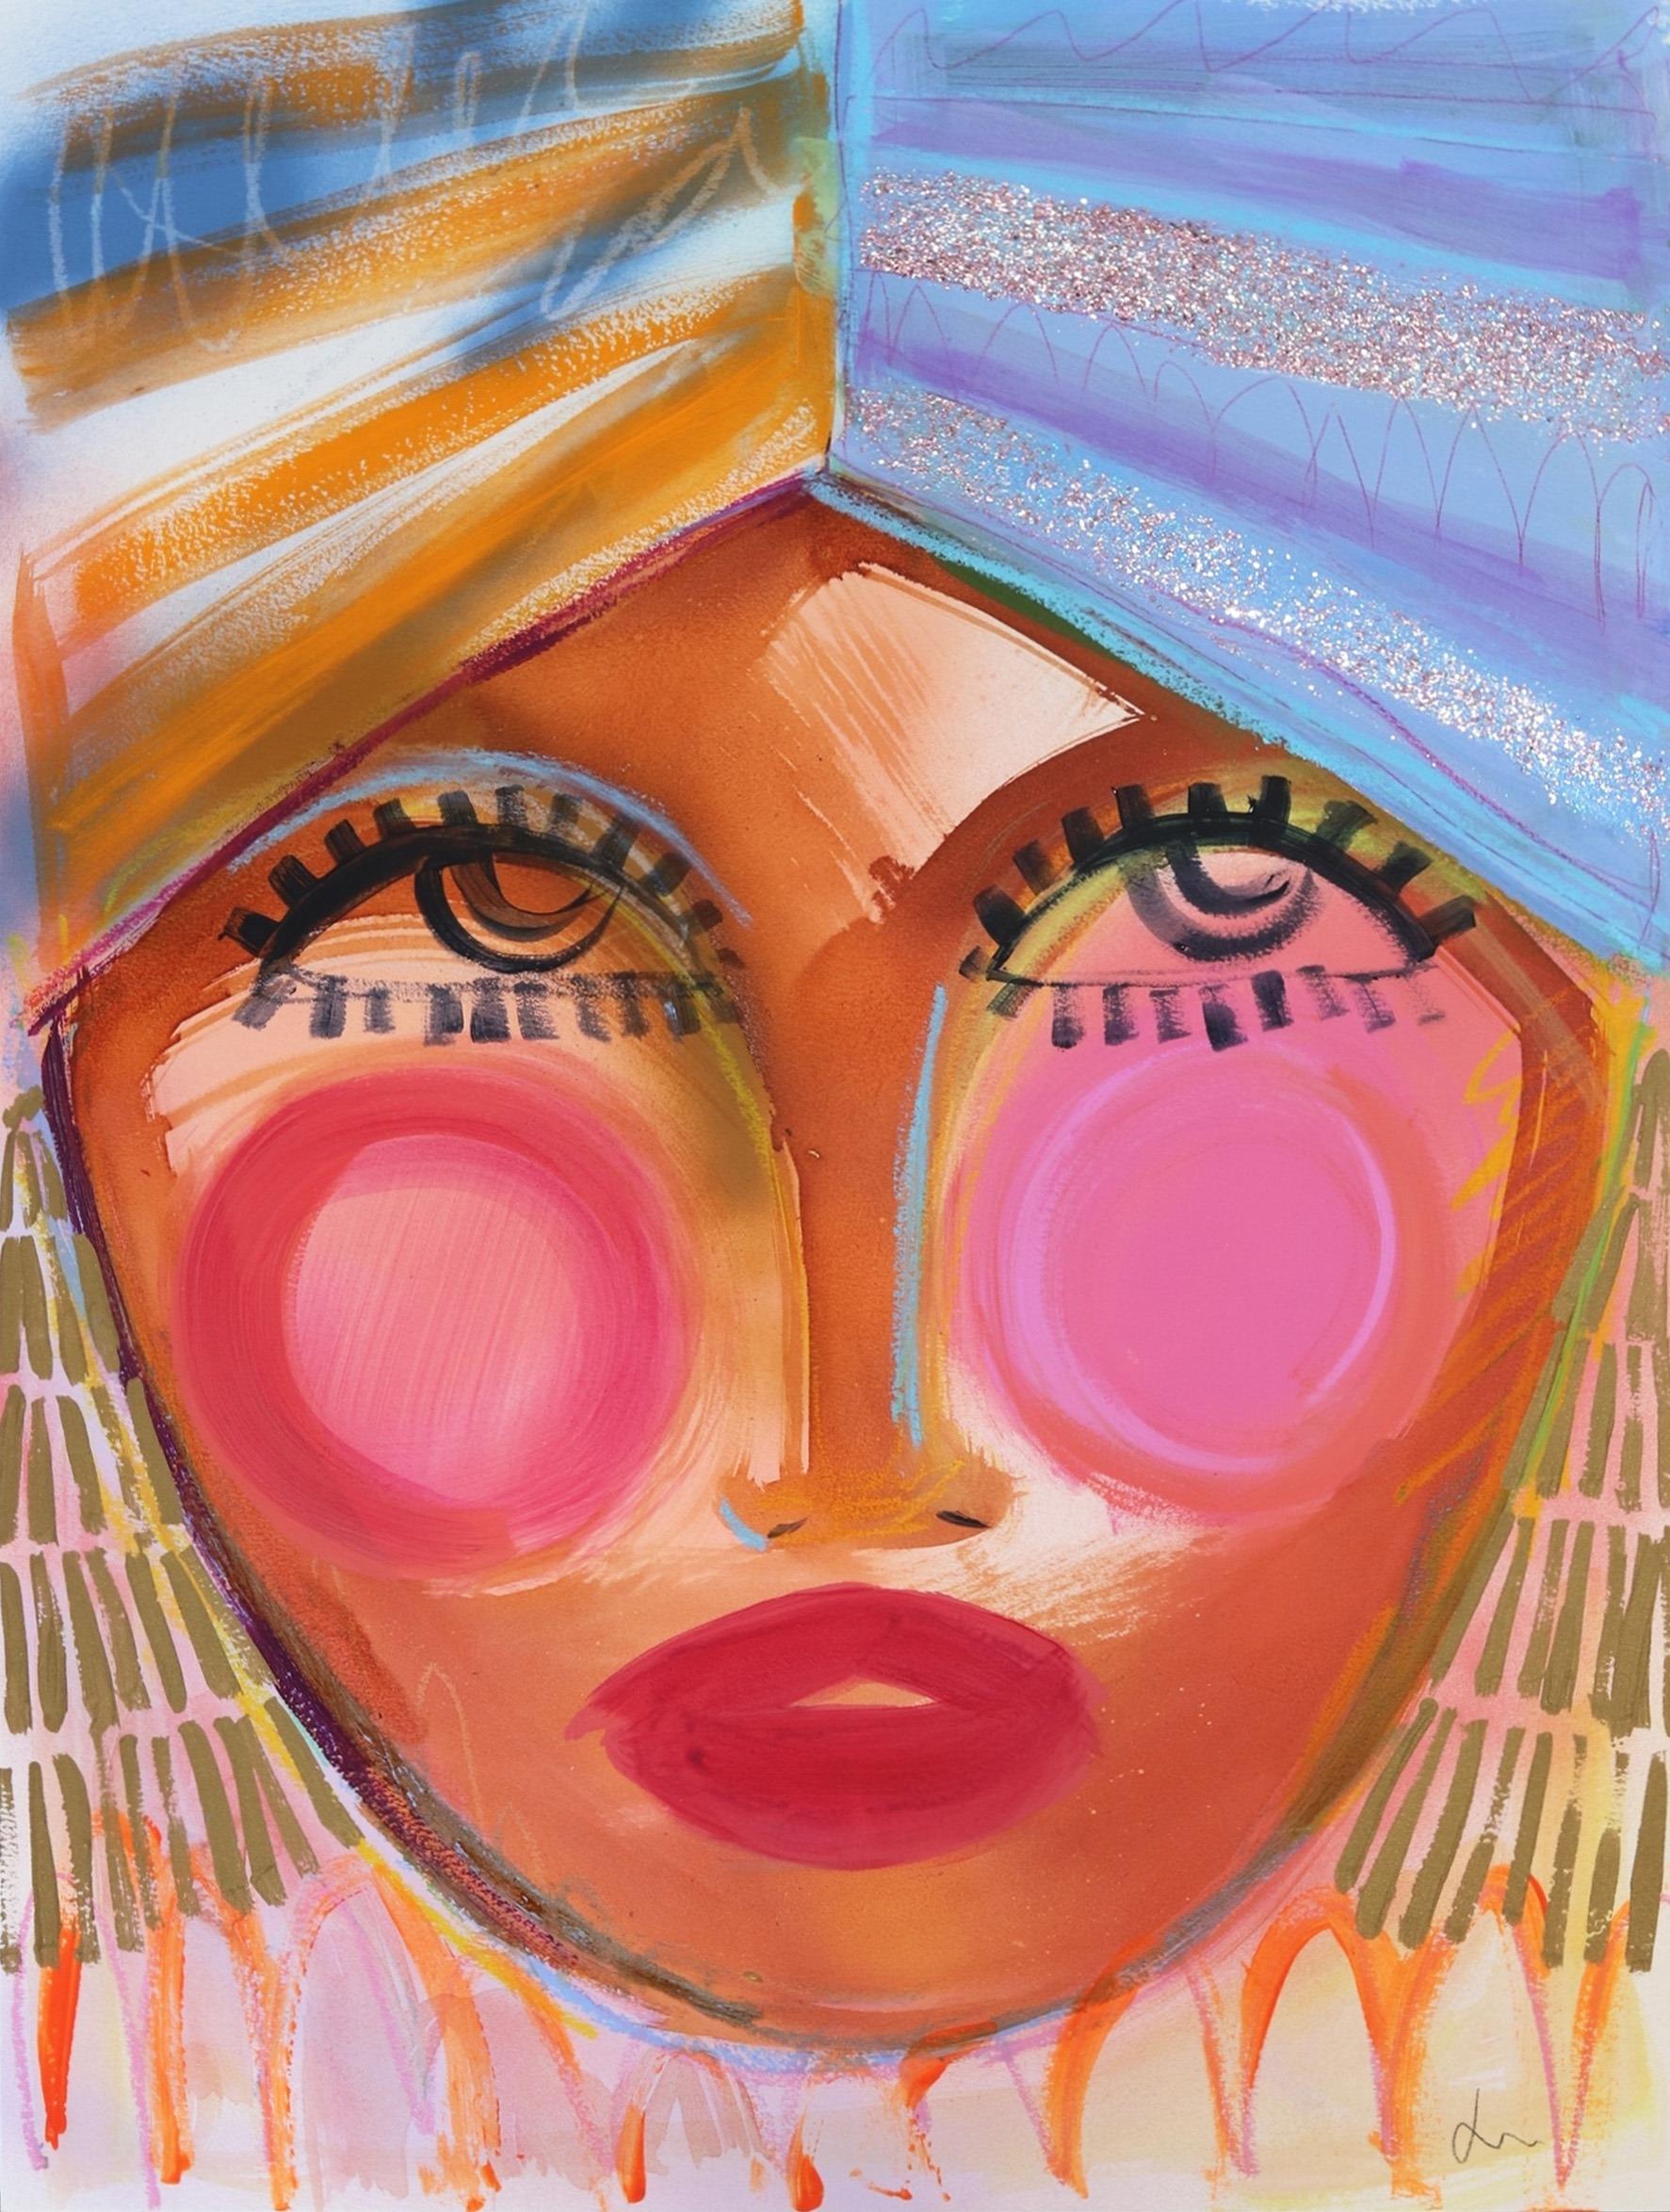 Lindsey McCord Figurative Painting - Selena - Colorful Abstract Figurative Portrait Original Painting